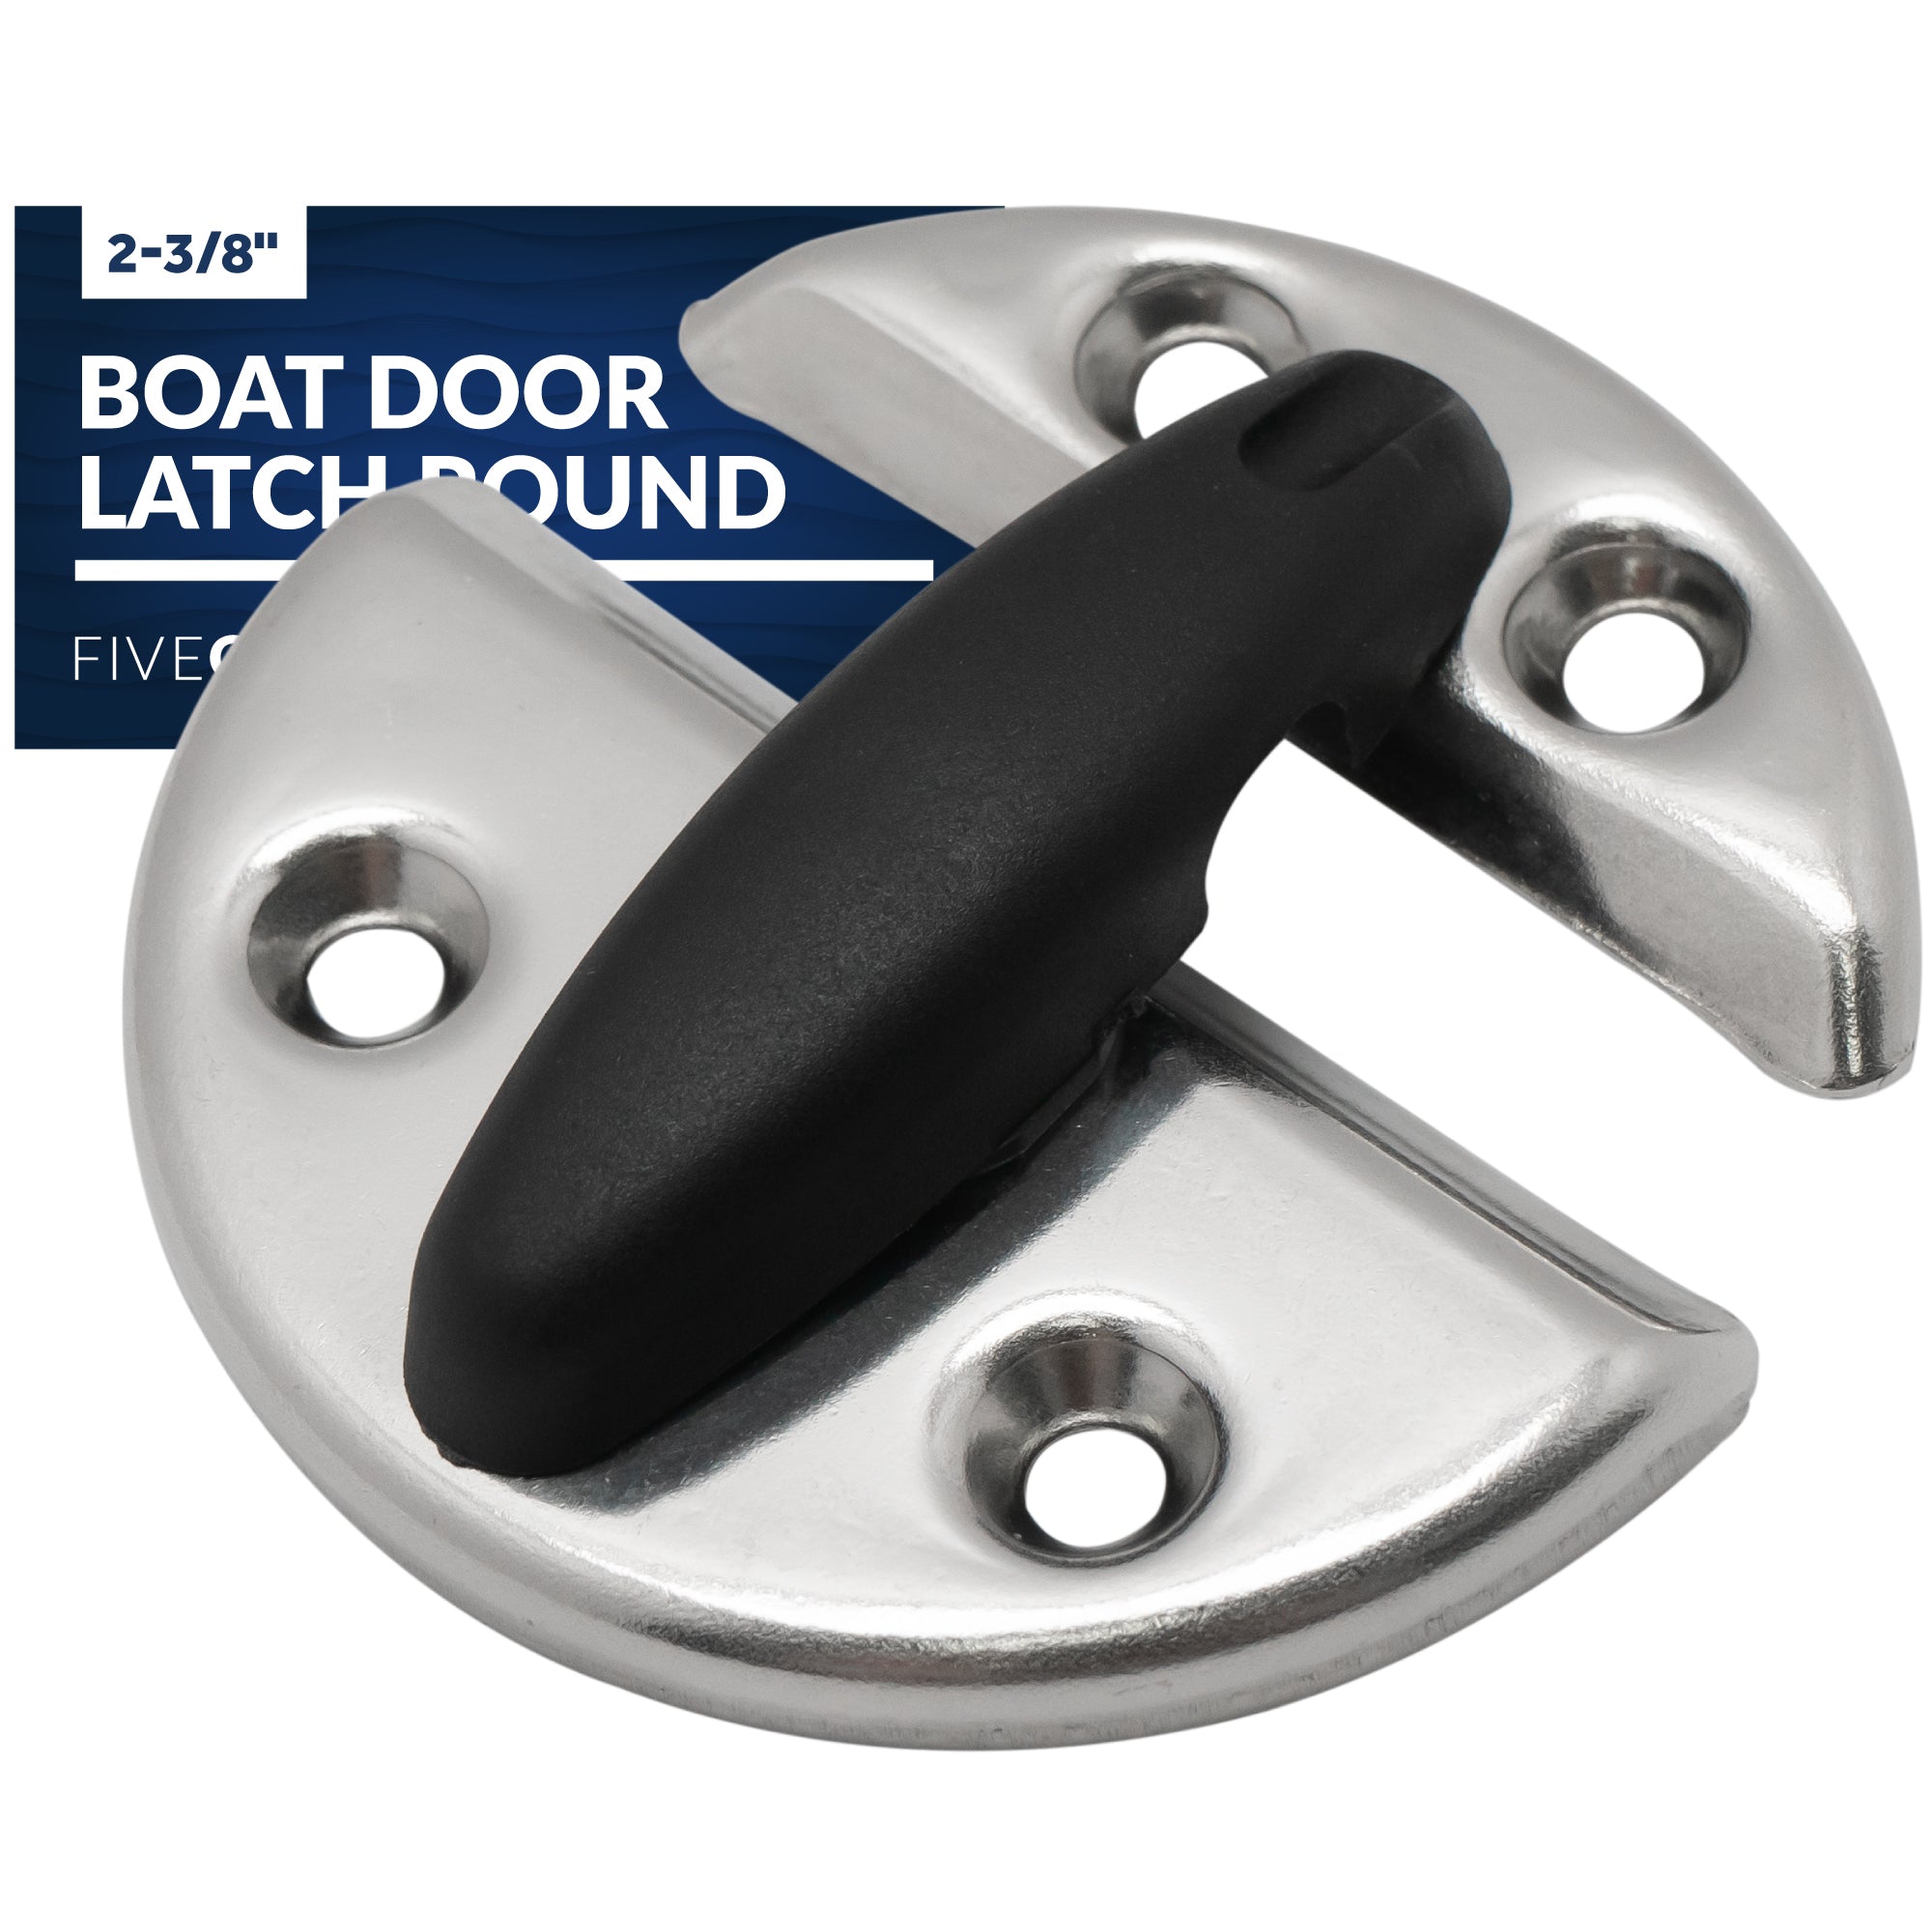 Boat Door Latch Round 2-3/8" Stainless Steel - FO556